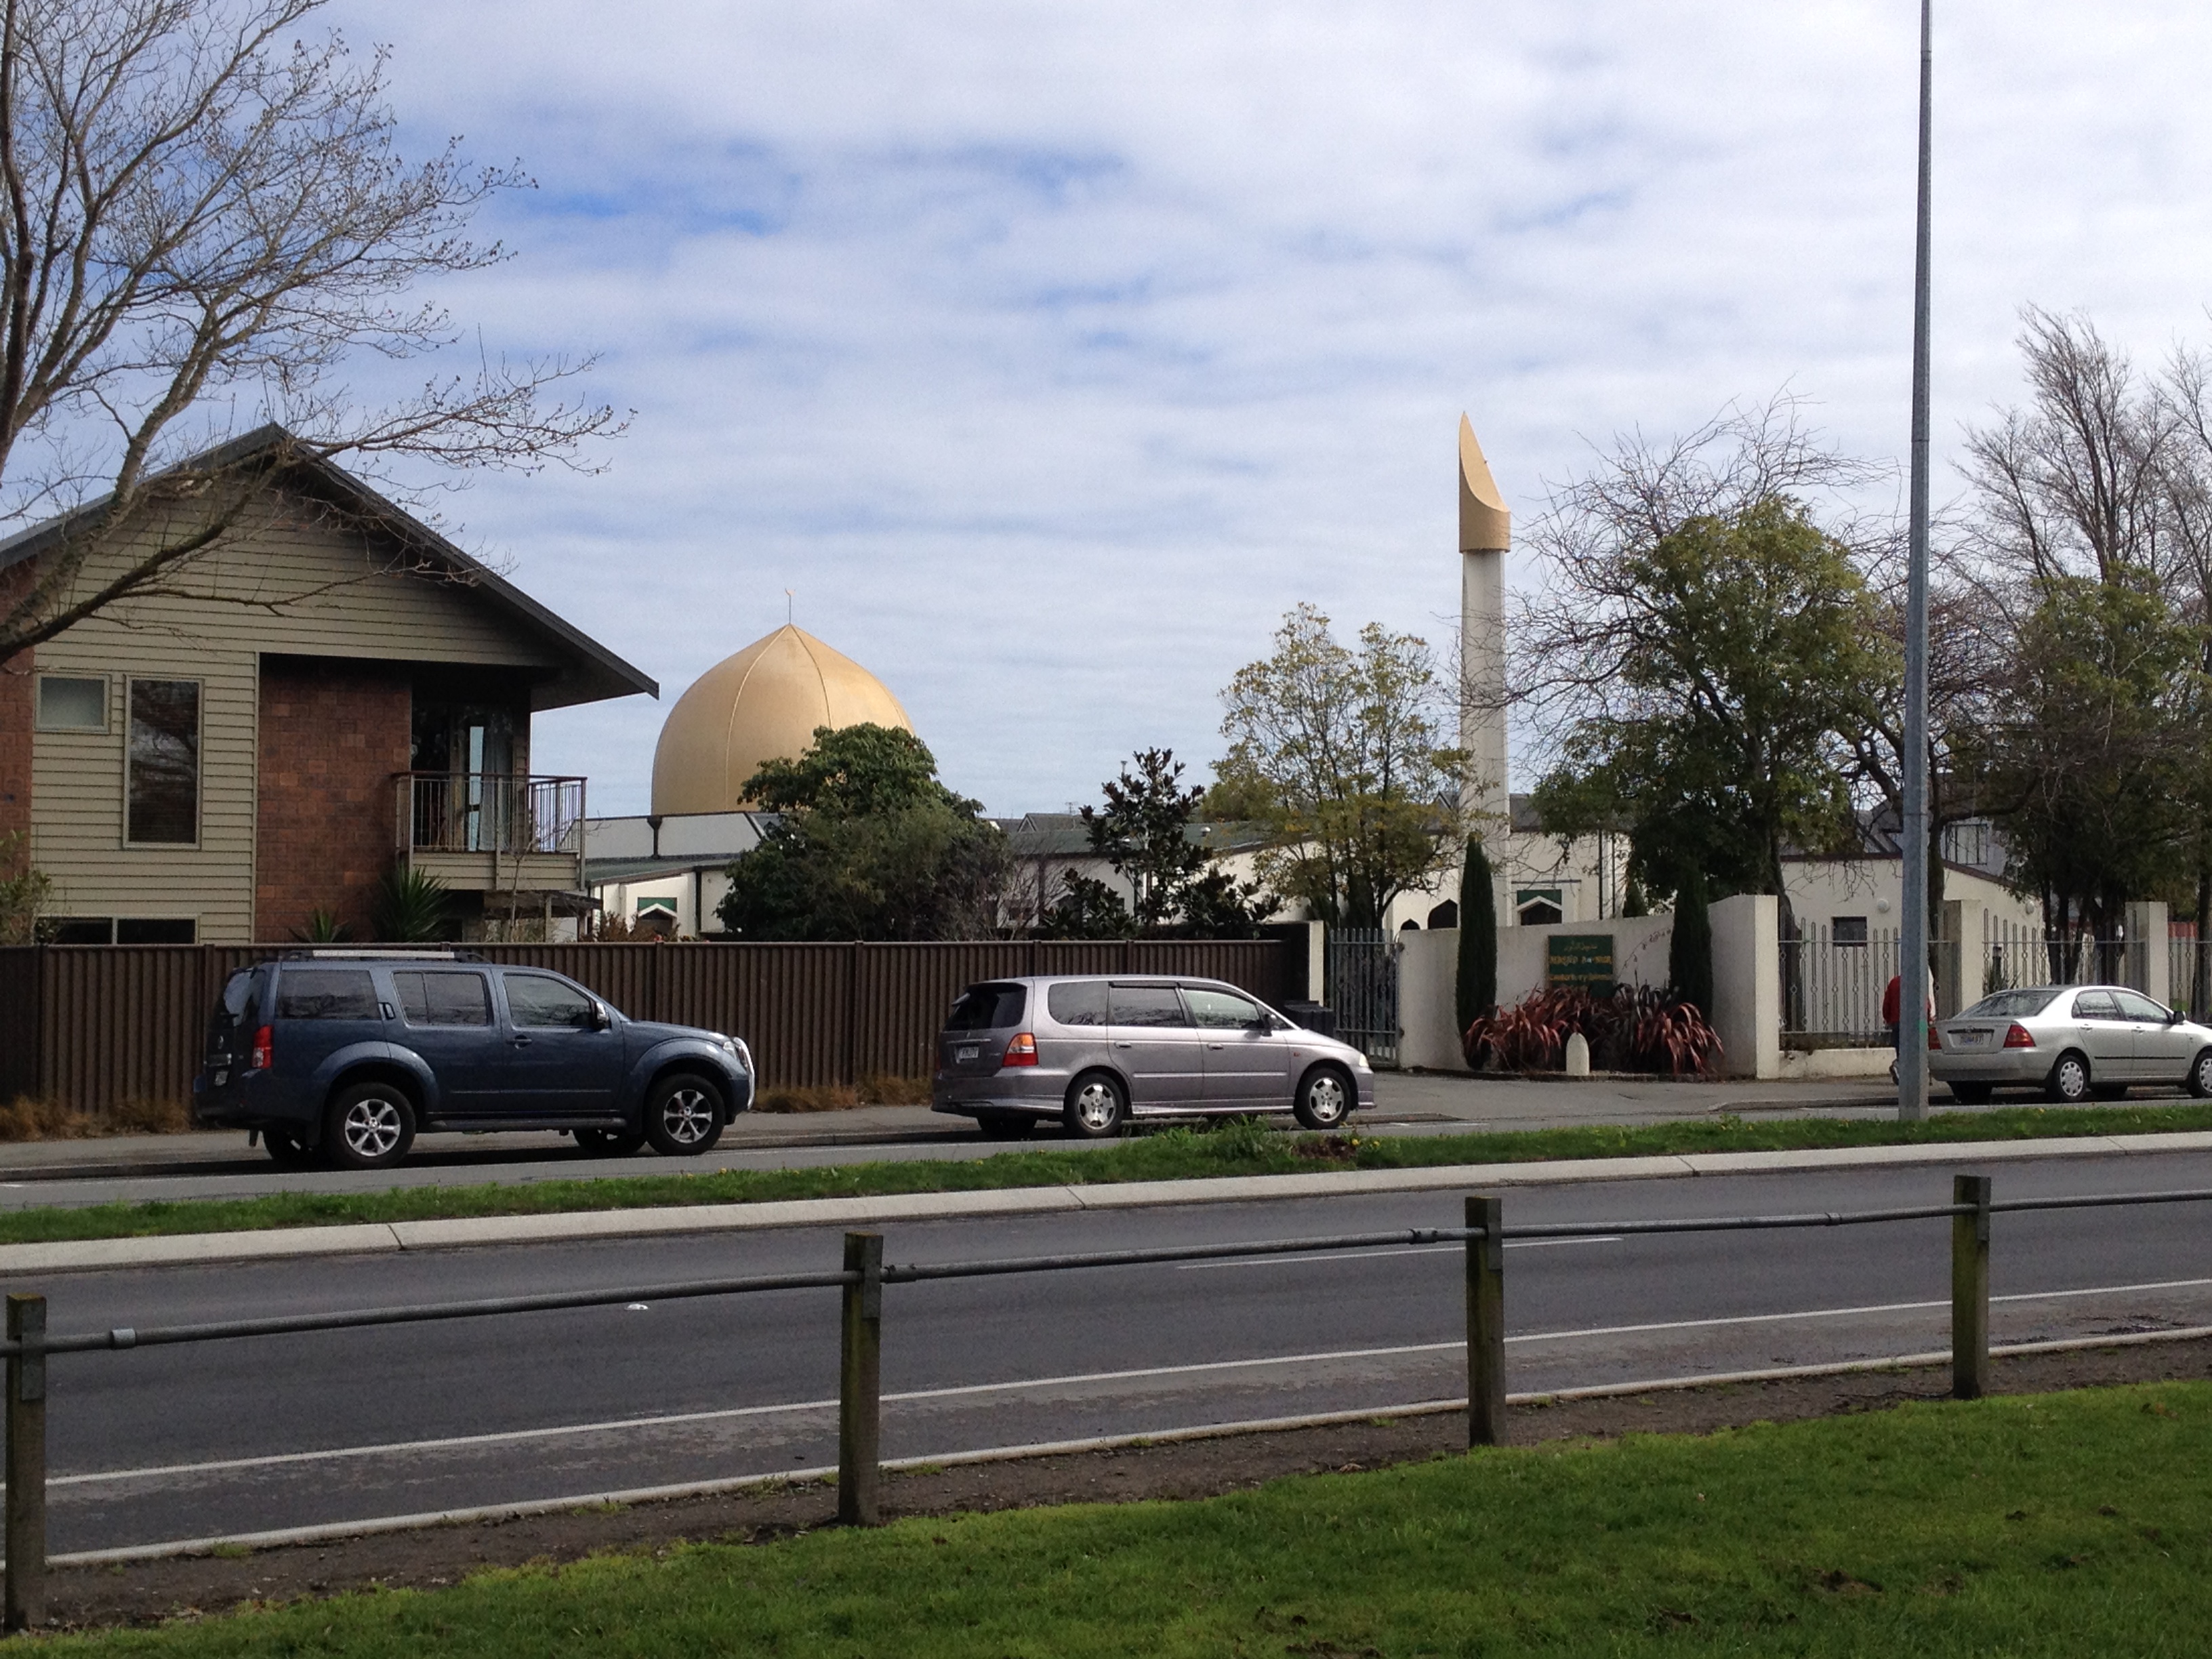 Sympathy on five-year anniversary of Christchurch terror attacks